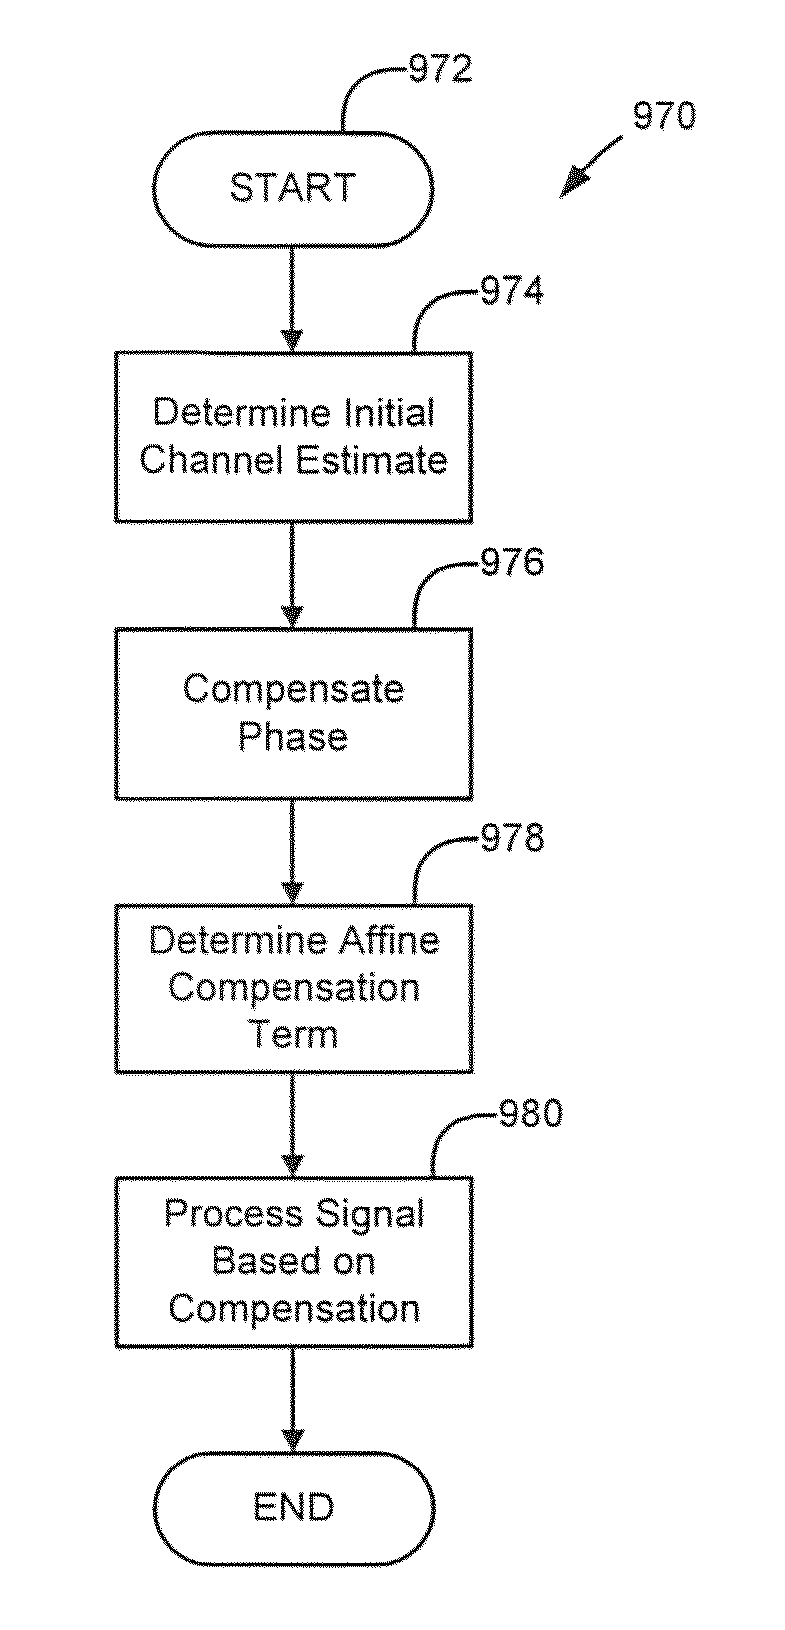 Compensation for residual frequency offset, phase noise and sampling phase offset in wireless networks